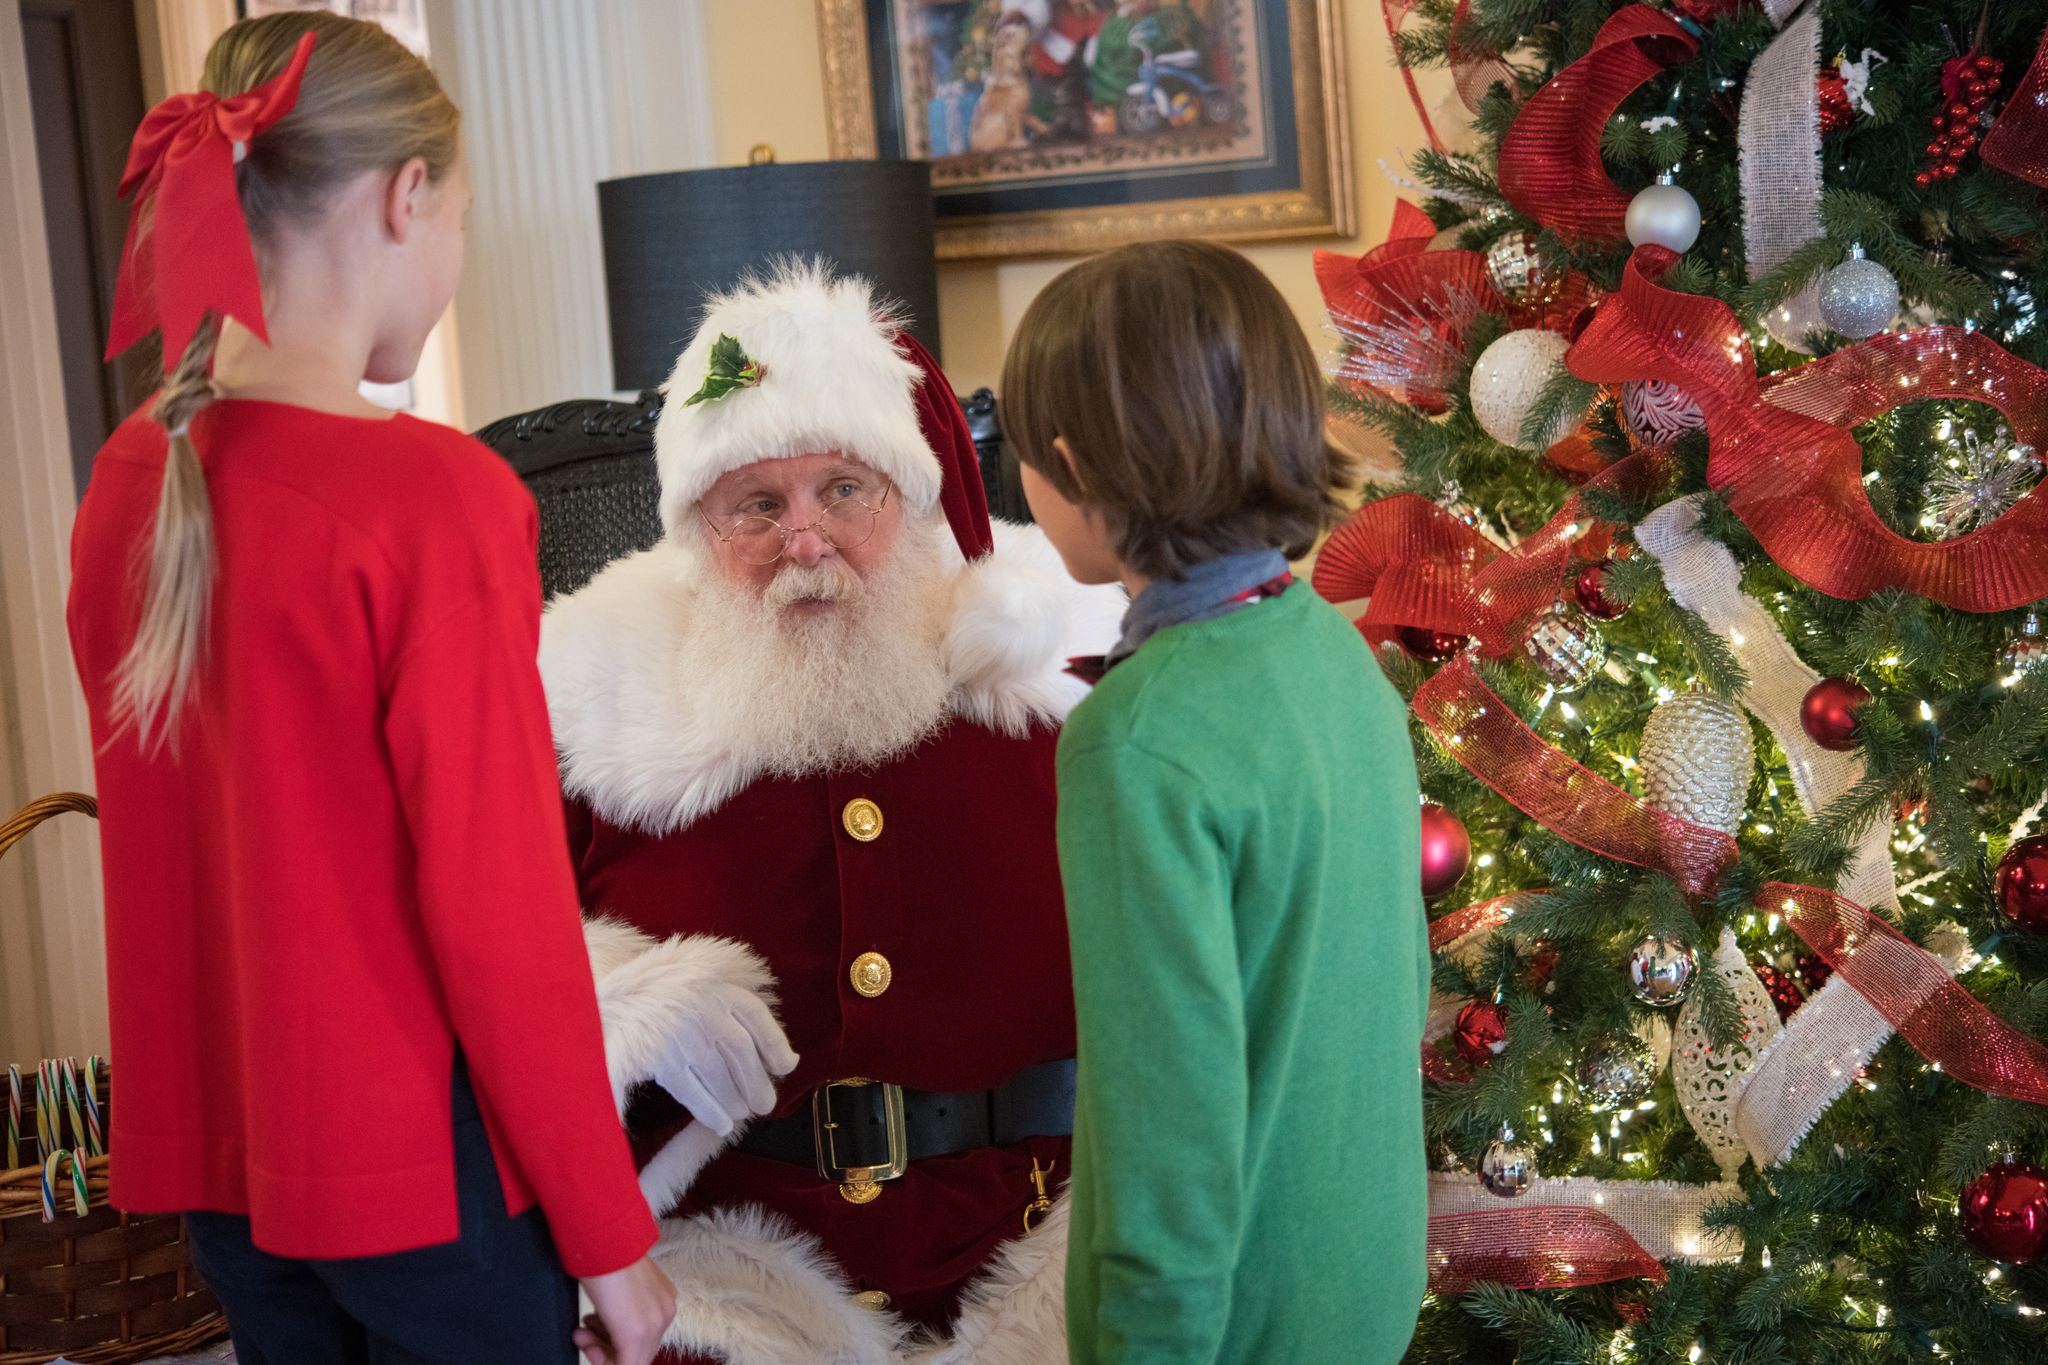 Children speaking to Santa at the Uptowne Holiday Stroll in Uptowne High Point, NC at the JH Adams Inn.